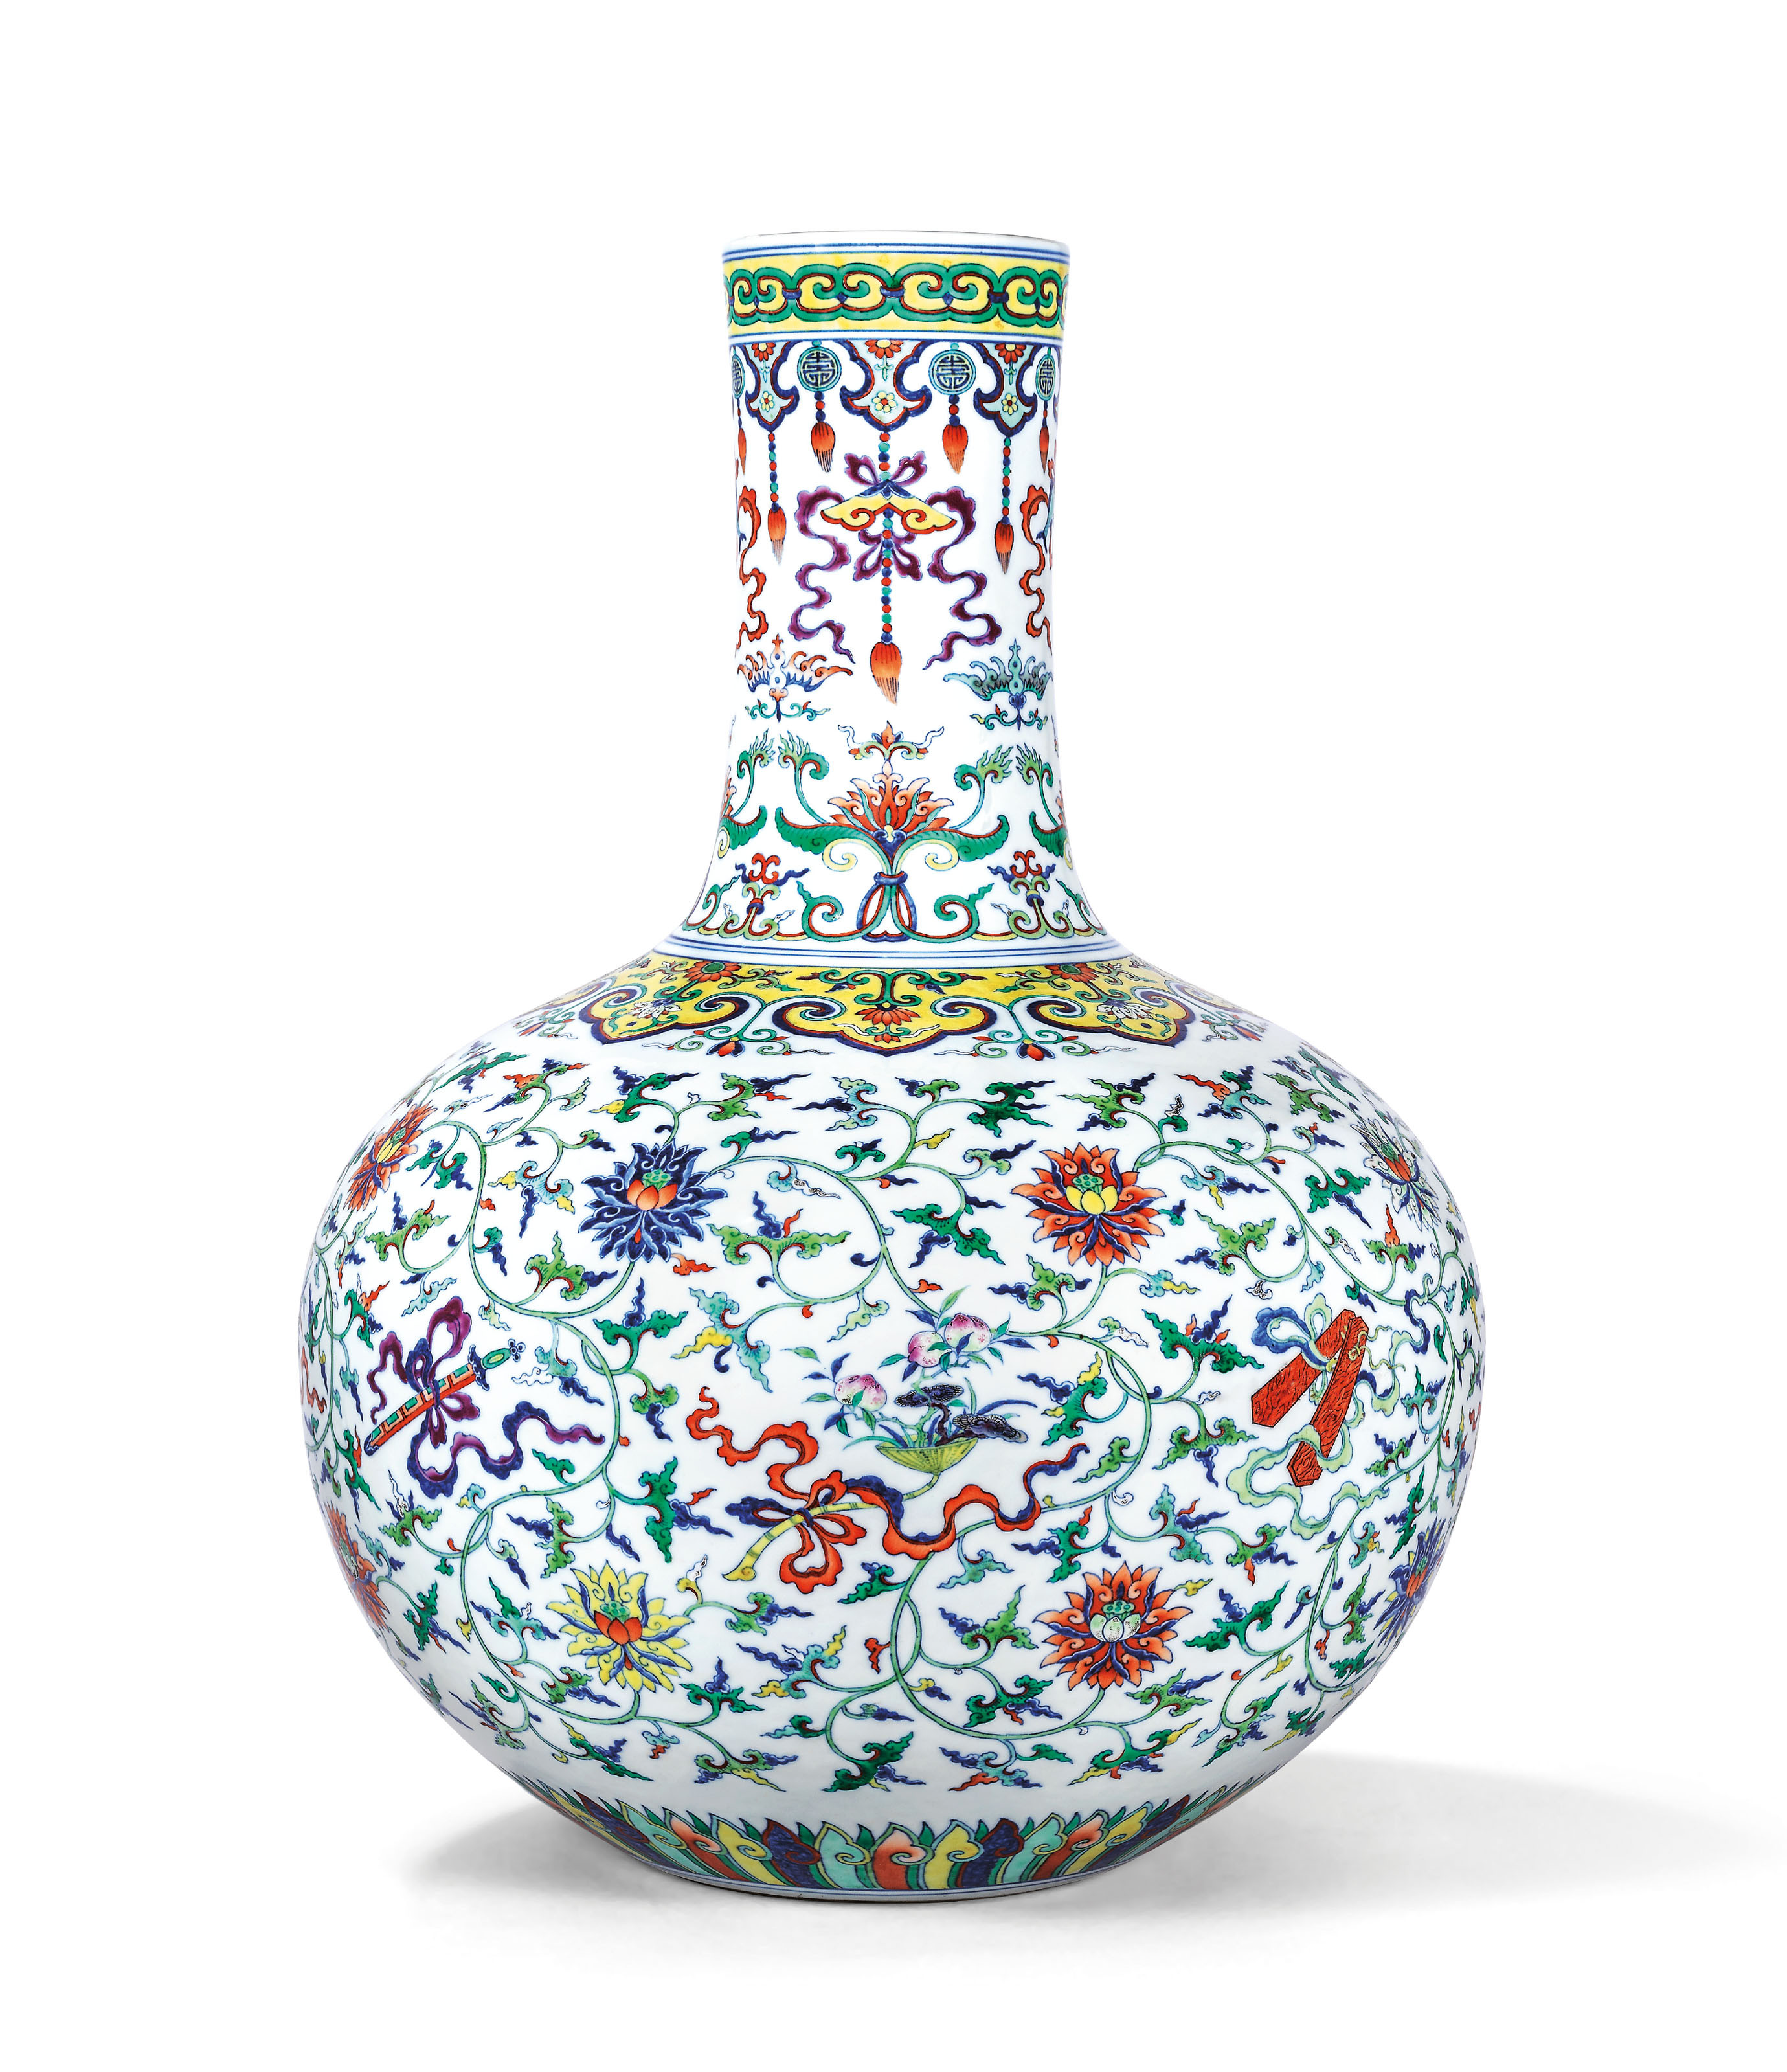 Susan Paley Vases Of Philbrook Museum In This Rare Chinese Vase Languished In Storage at An Oklahoma Museum for Over A Decade then It sold for 14 5 Million